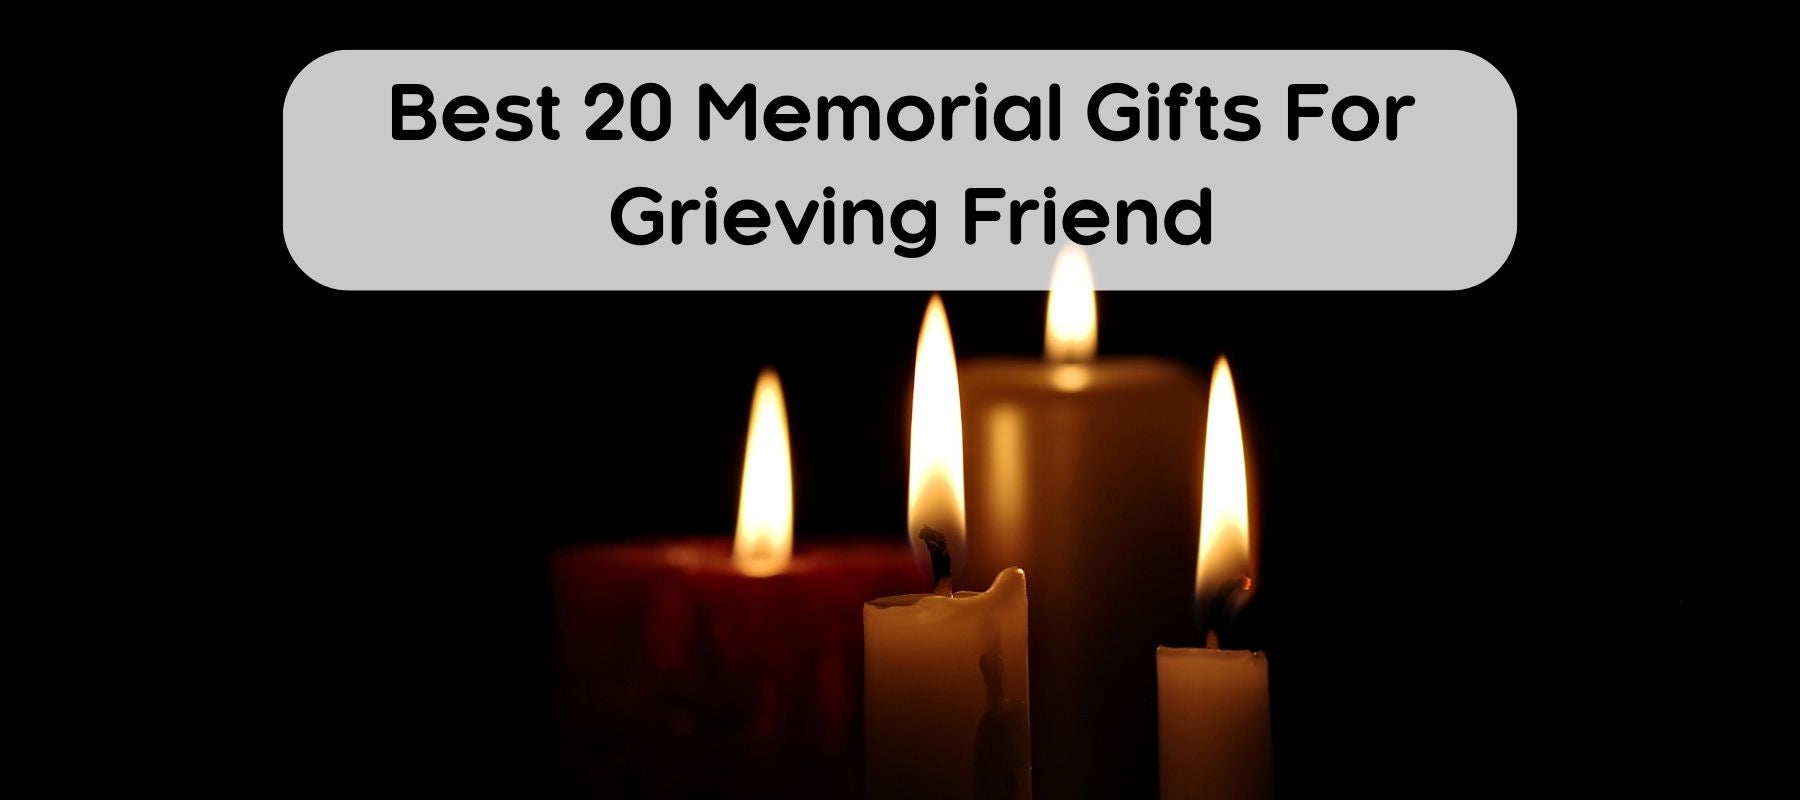 Gifts-for-grieving-friend